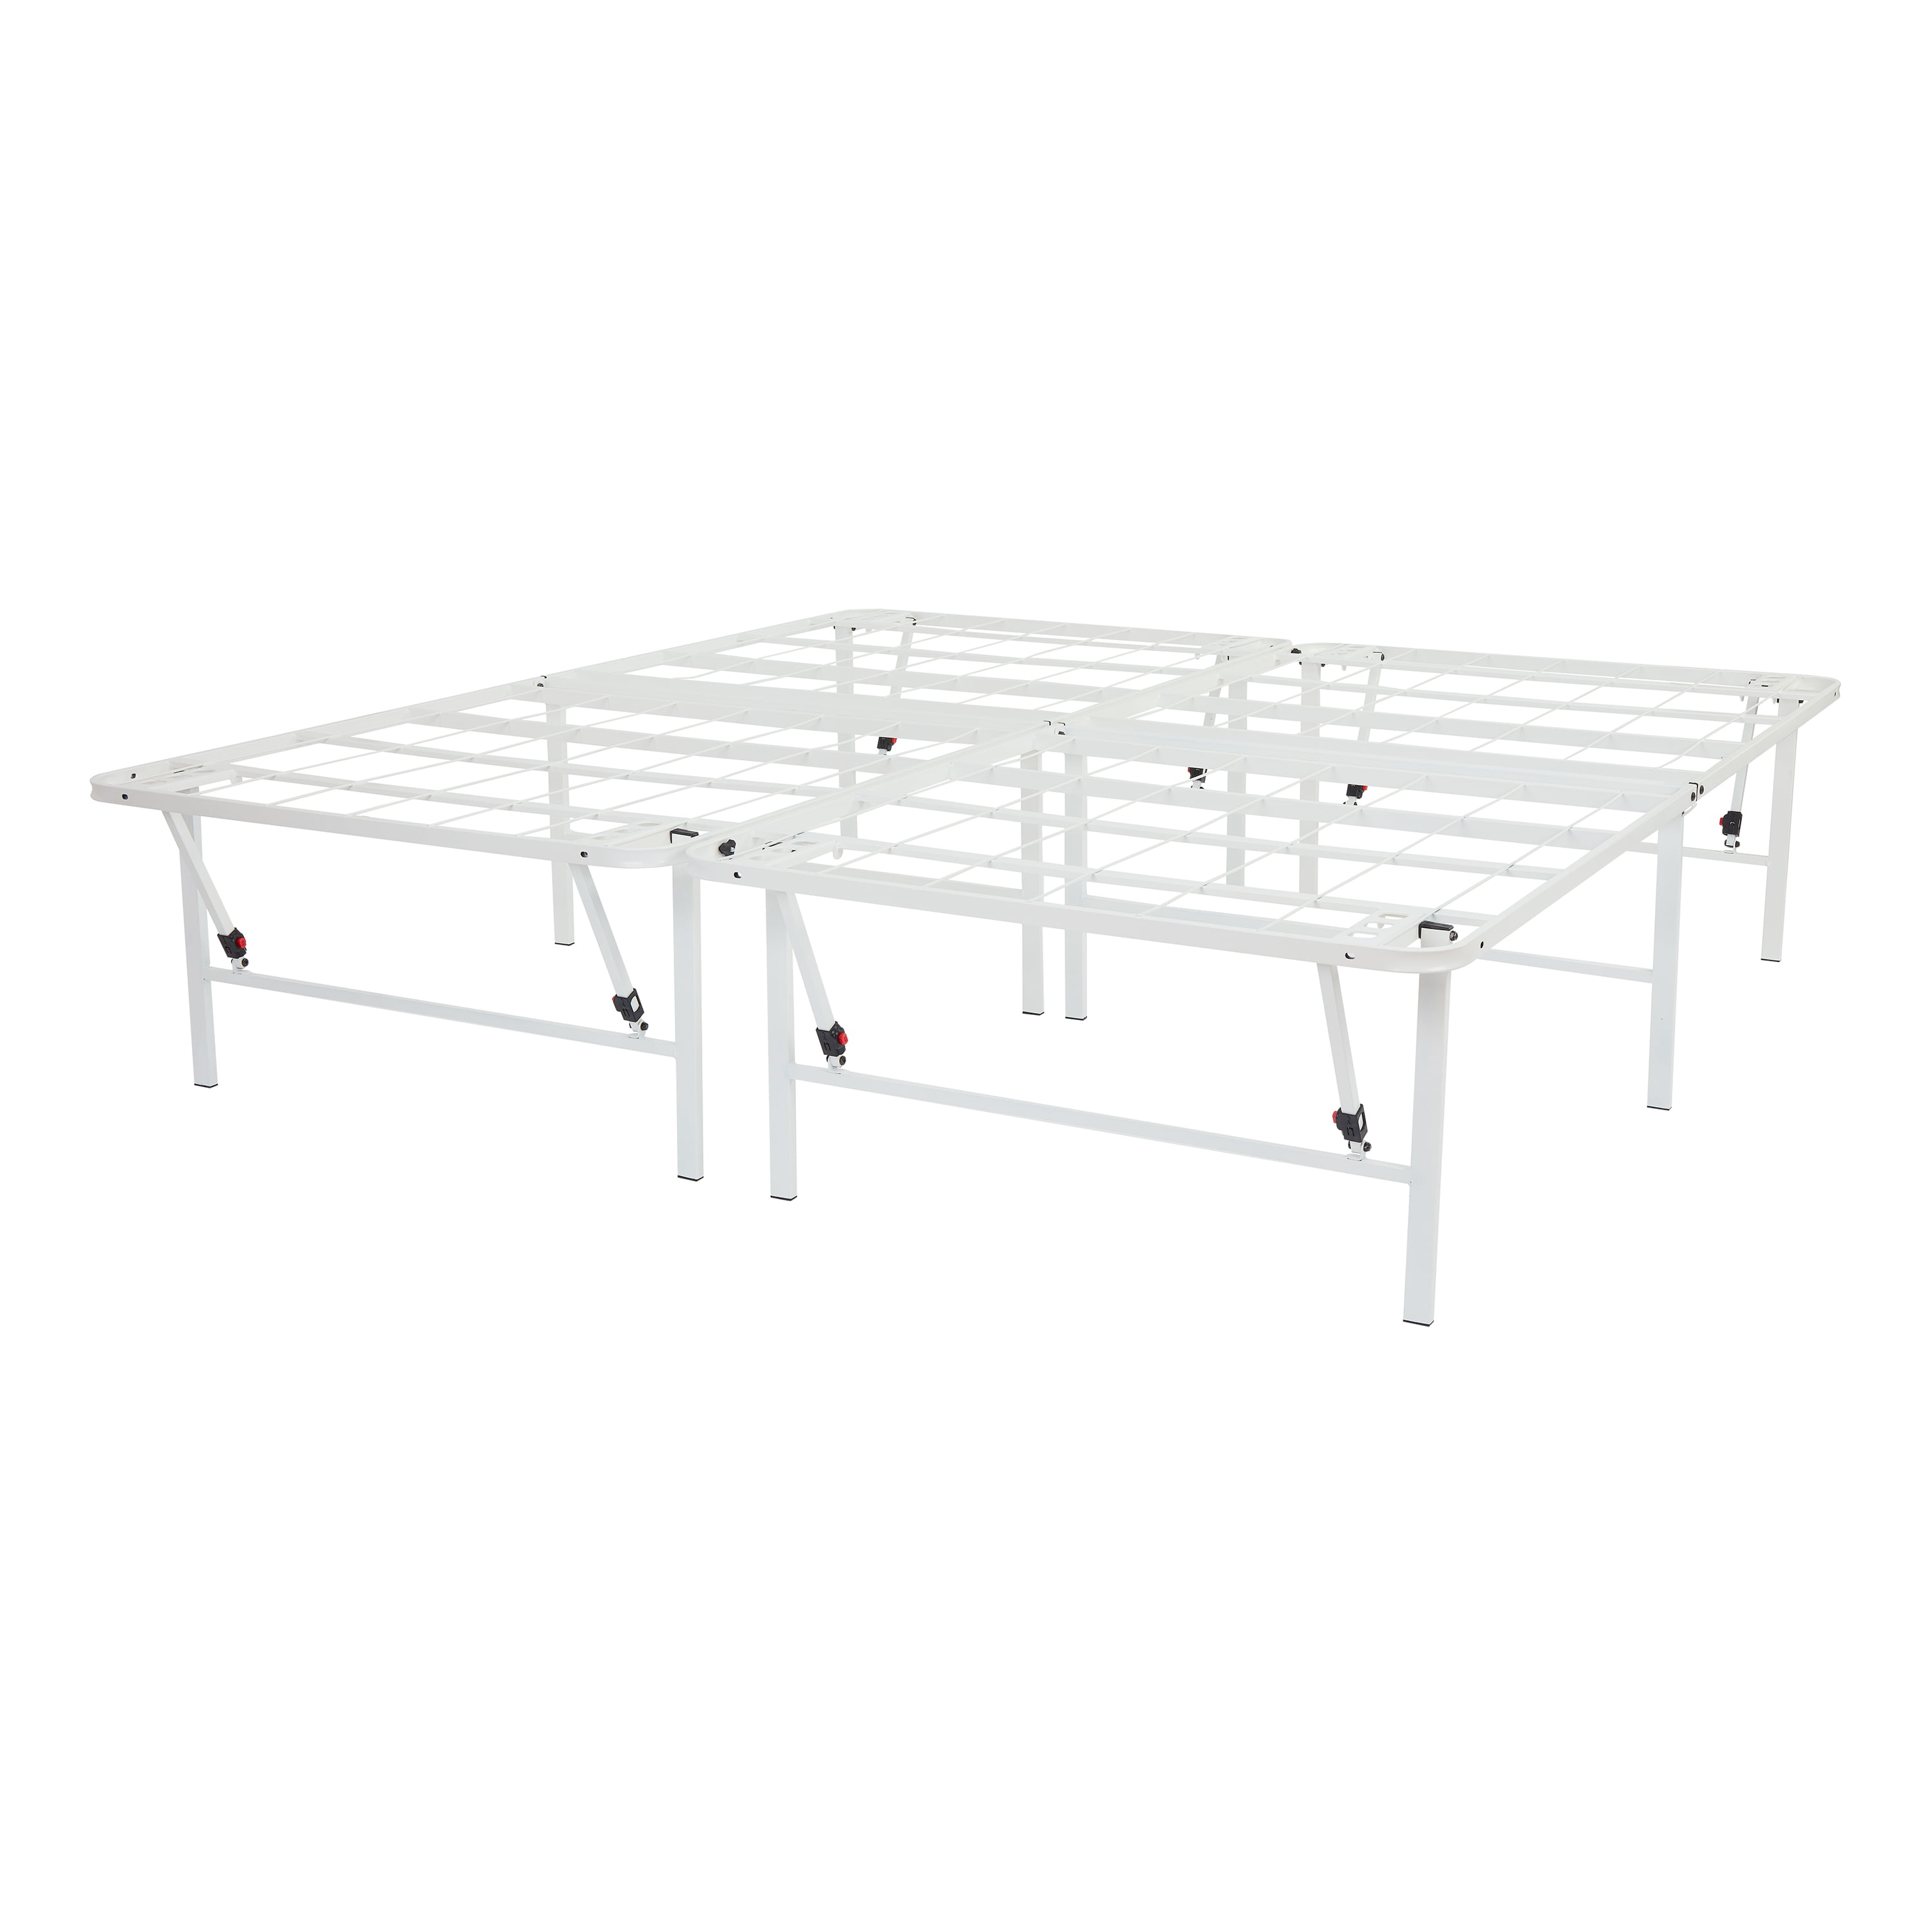 Mainstays 18 High Profile Foldable Steel Bed Frame Powder-Coated Durable Steel 